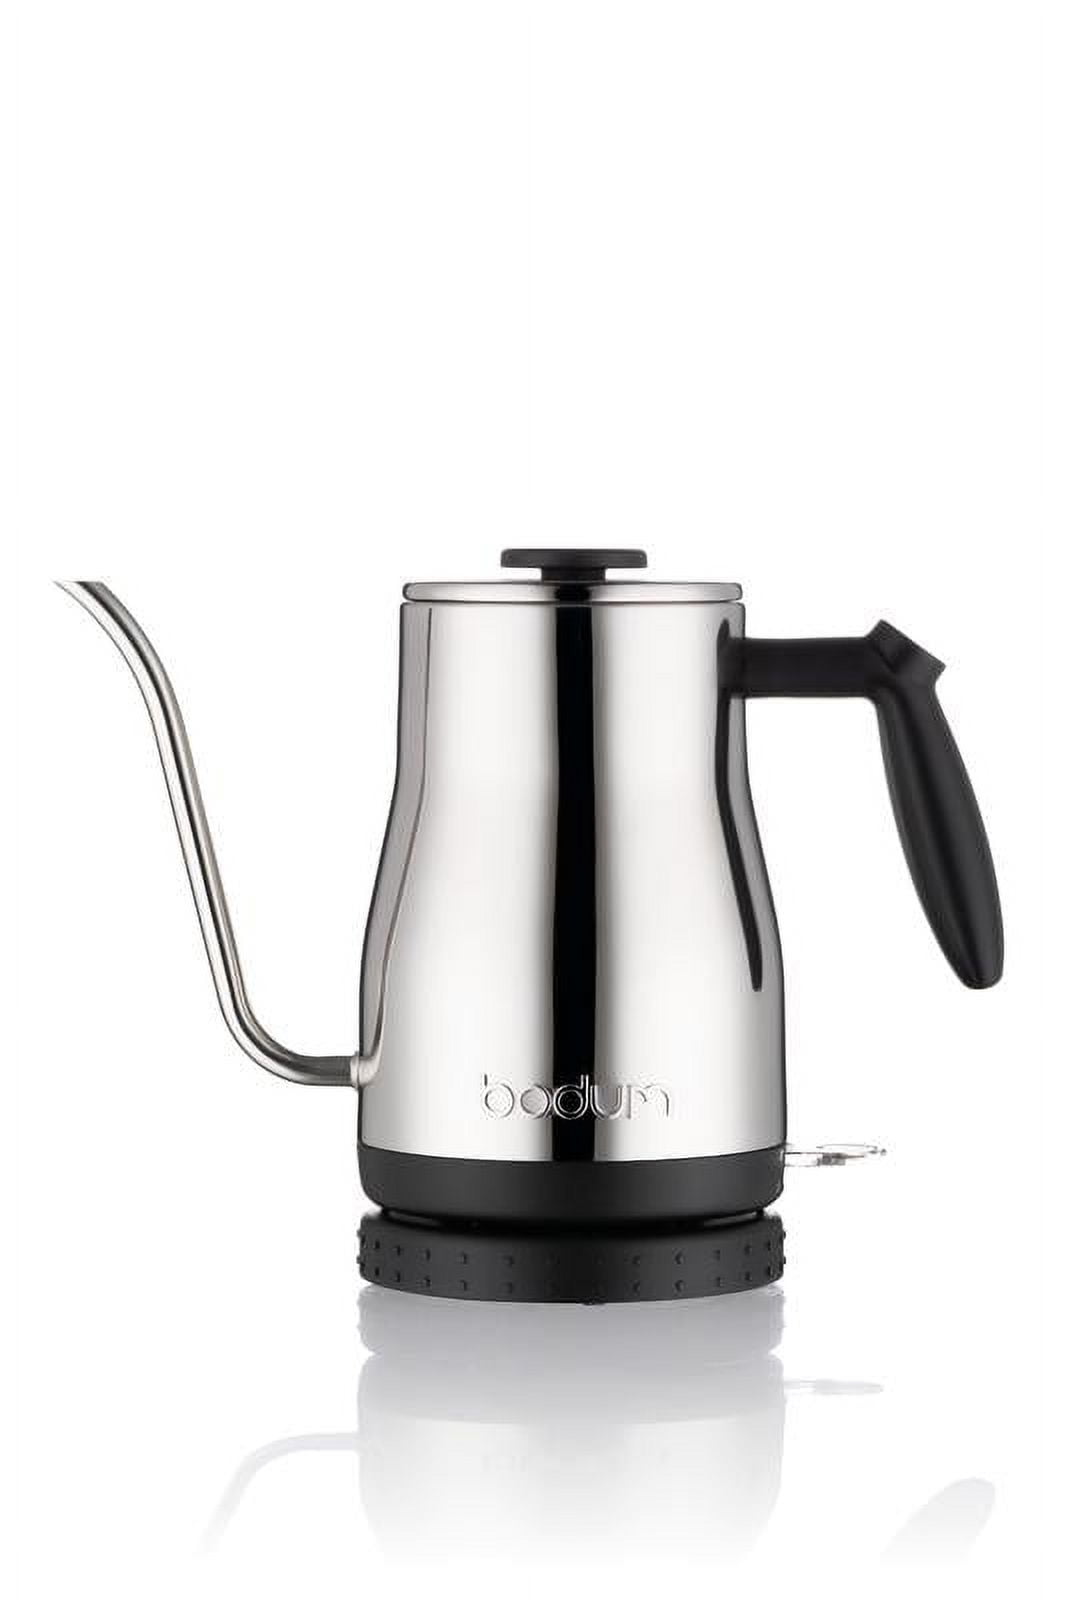  Bodum Bistro Electric Water Kettle, 17 Ounce, Black &  10948-01BUS Brazil French Press Coffee and Tea Maker, 12 Ounce, Black: Home  & Kitchen